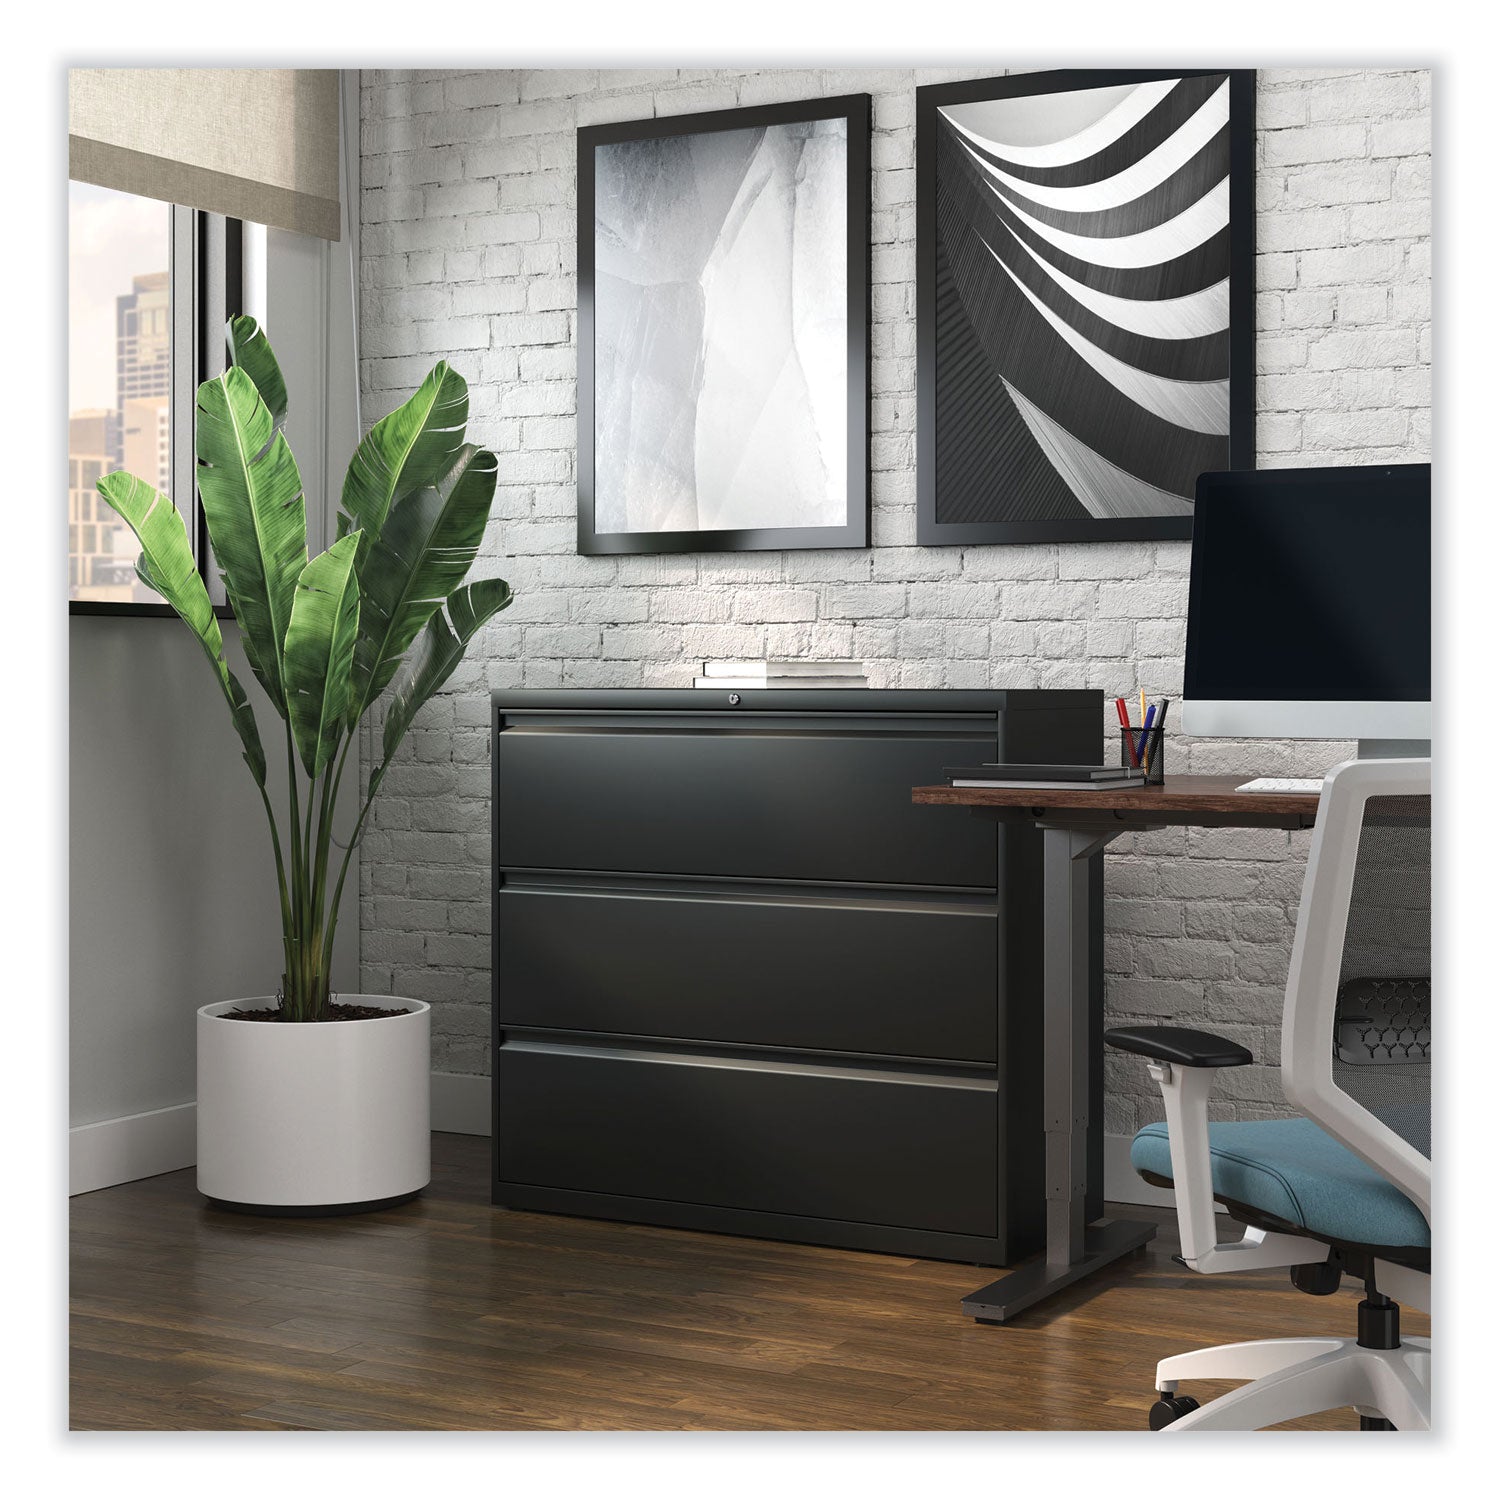 lateral-file-3-legal-letter-a4-a5-size-file-drawers-black-42-x-1863-x-4025_alehlf4241bl - 7